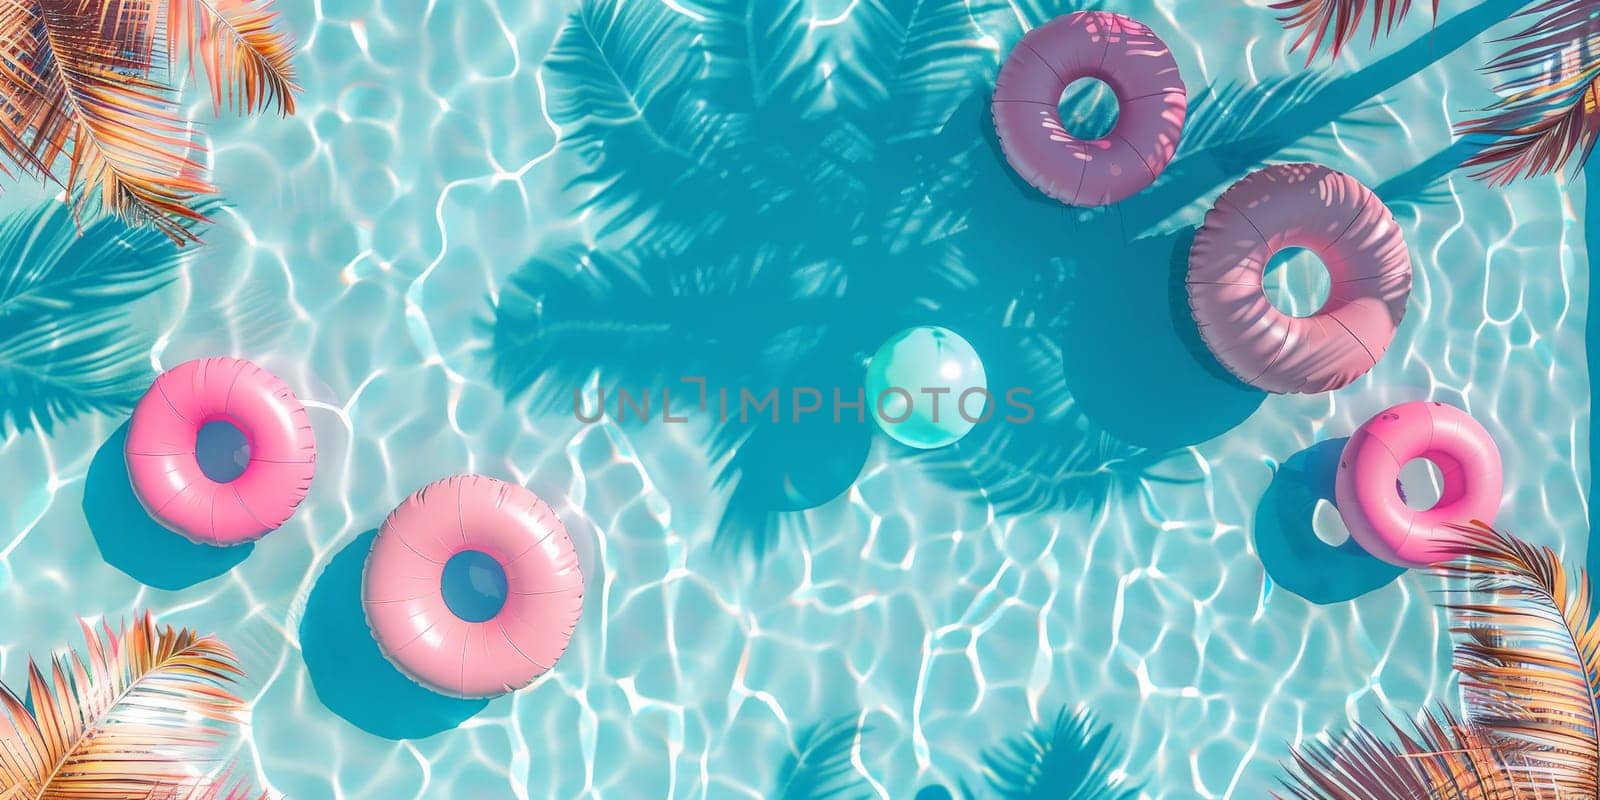 A blue pool with pink and white donuts floating on it by nateemee